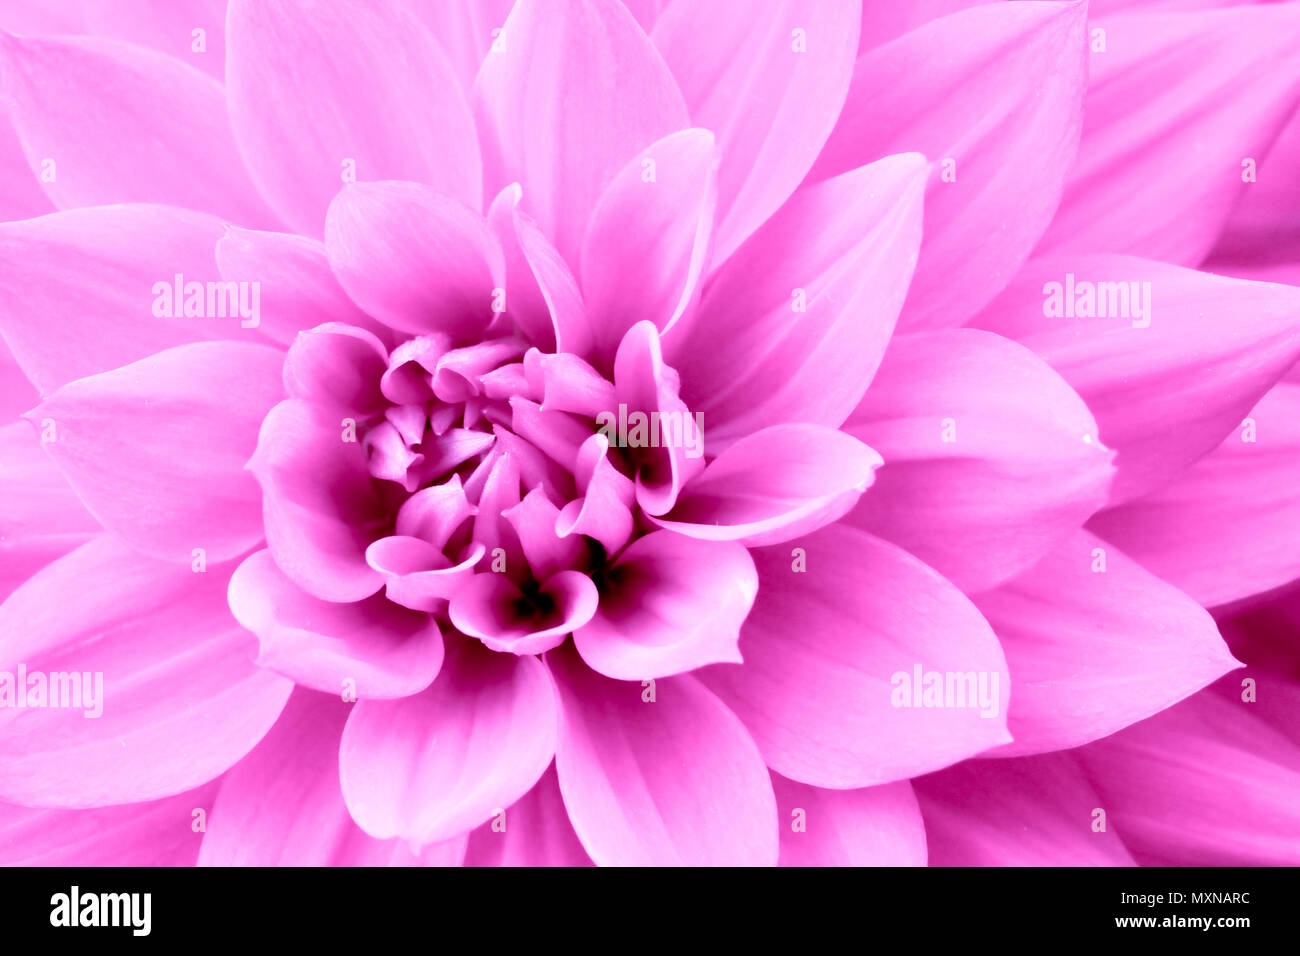 Pink purple dahlia flower macro photo. Color picture emphasizing pink shades and reddish shadows in intricate geometric pattern. Concept background fo Stock Photo